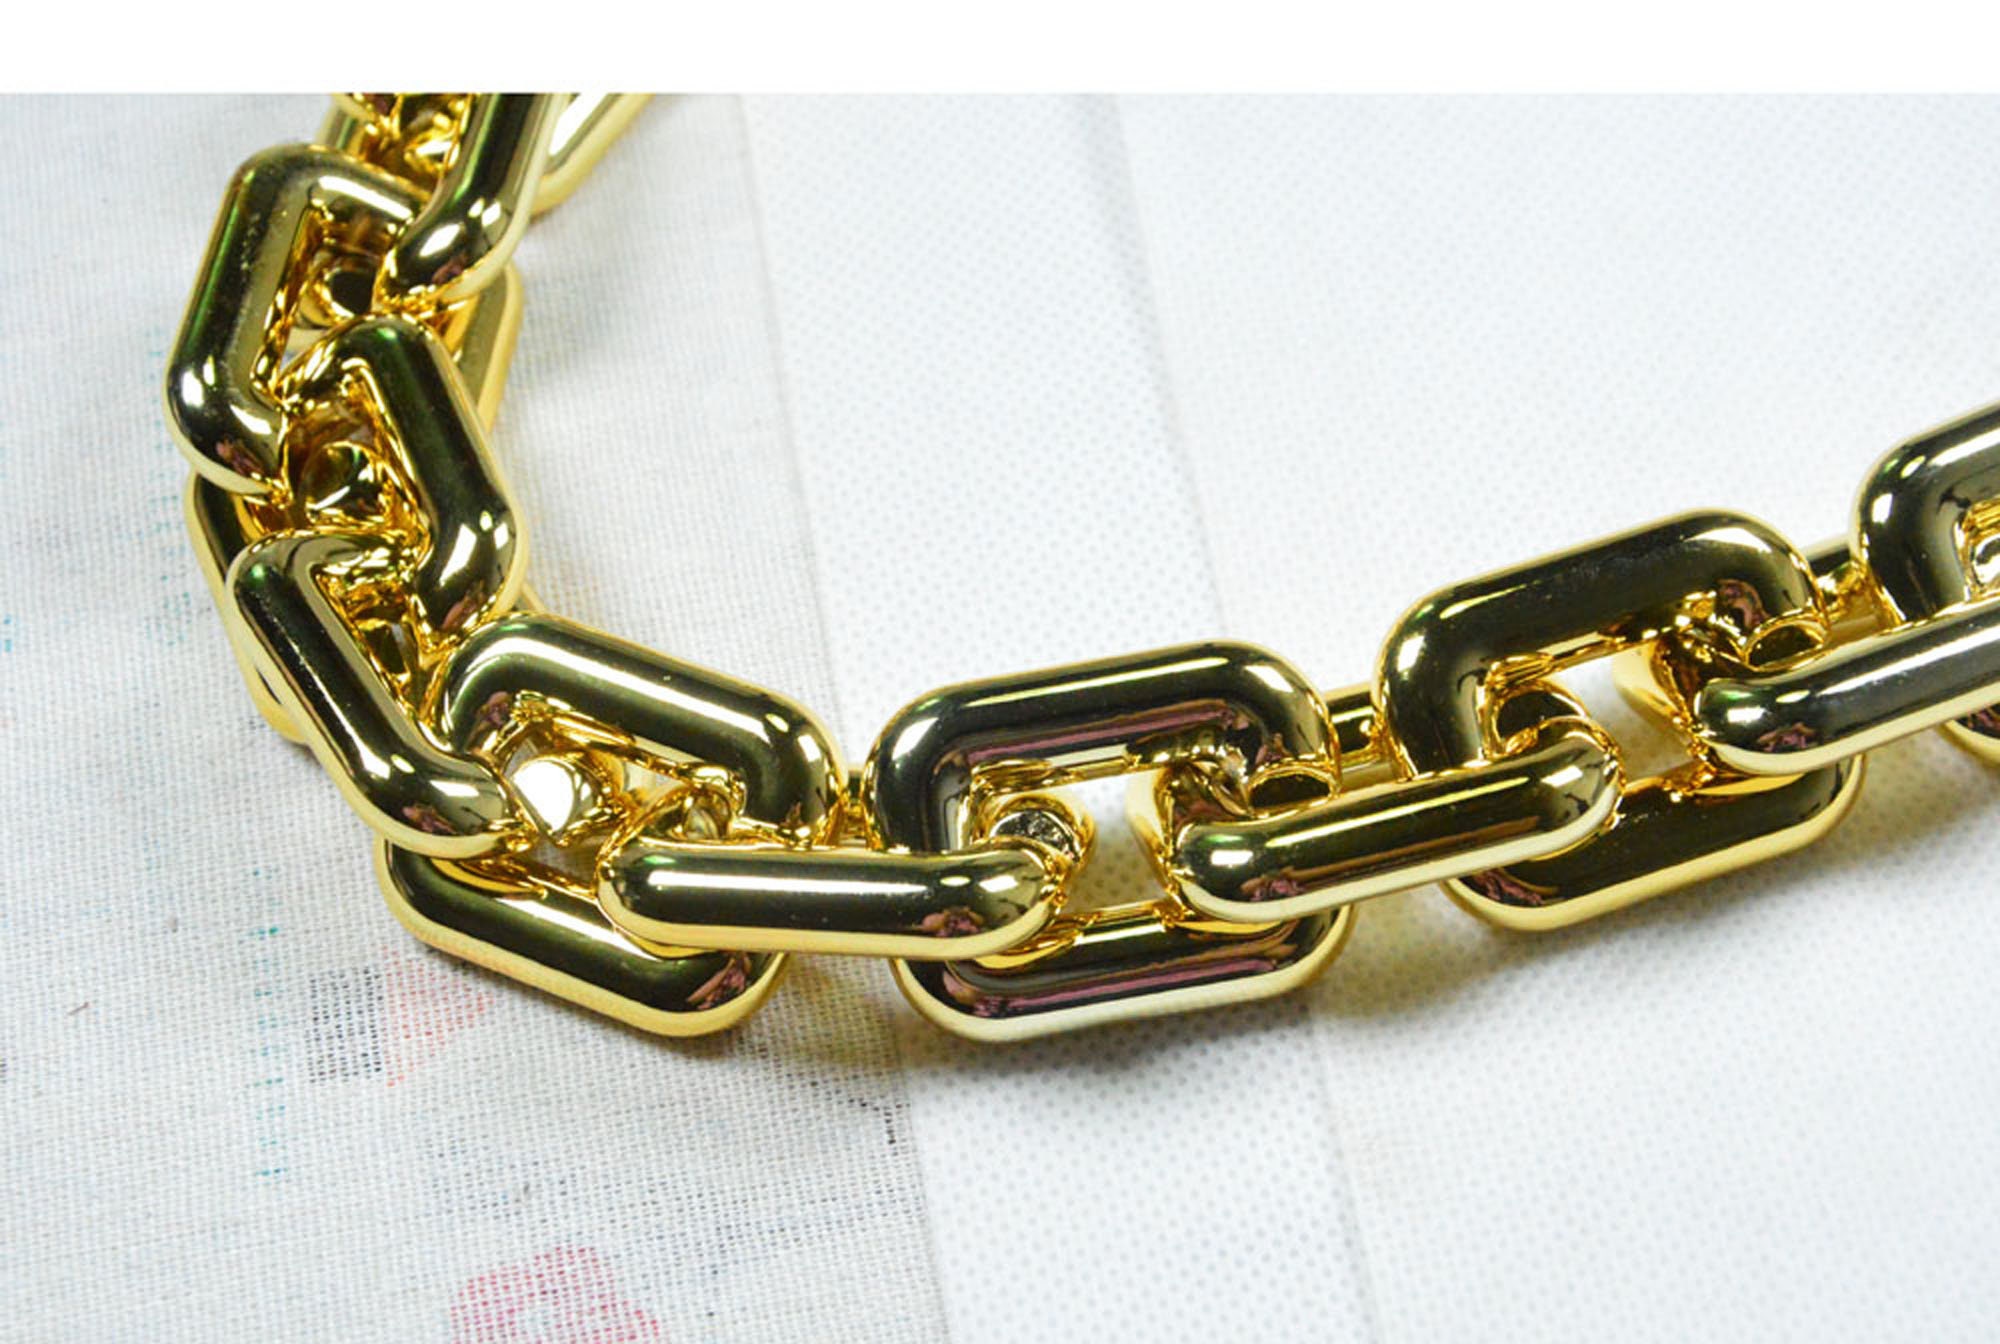 US$ 58.00 - 4 Feet Supper Large Chunky Resin Gold Chain Links, Plastic Chain  Links, Necklace Chain Links, Open Link ,Size 15mmx25mm - m.